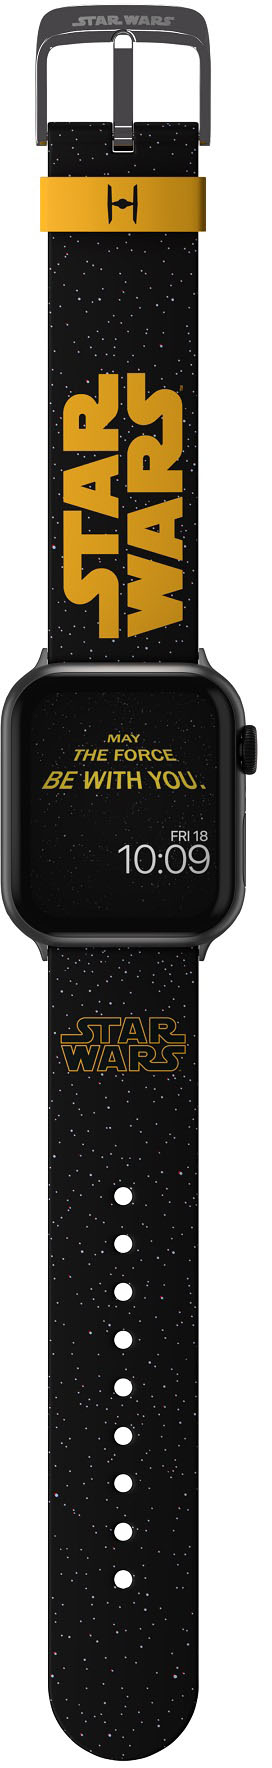 MobyFox STAR WARS Galactic Smartwatch Band Compatible with Apple Watch Fits 38mm, 40mm, 42mm ST-DSY22STW2024 - Best Buy